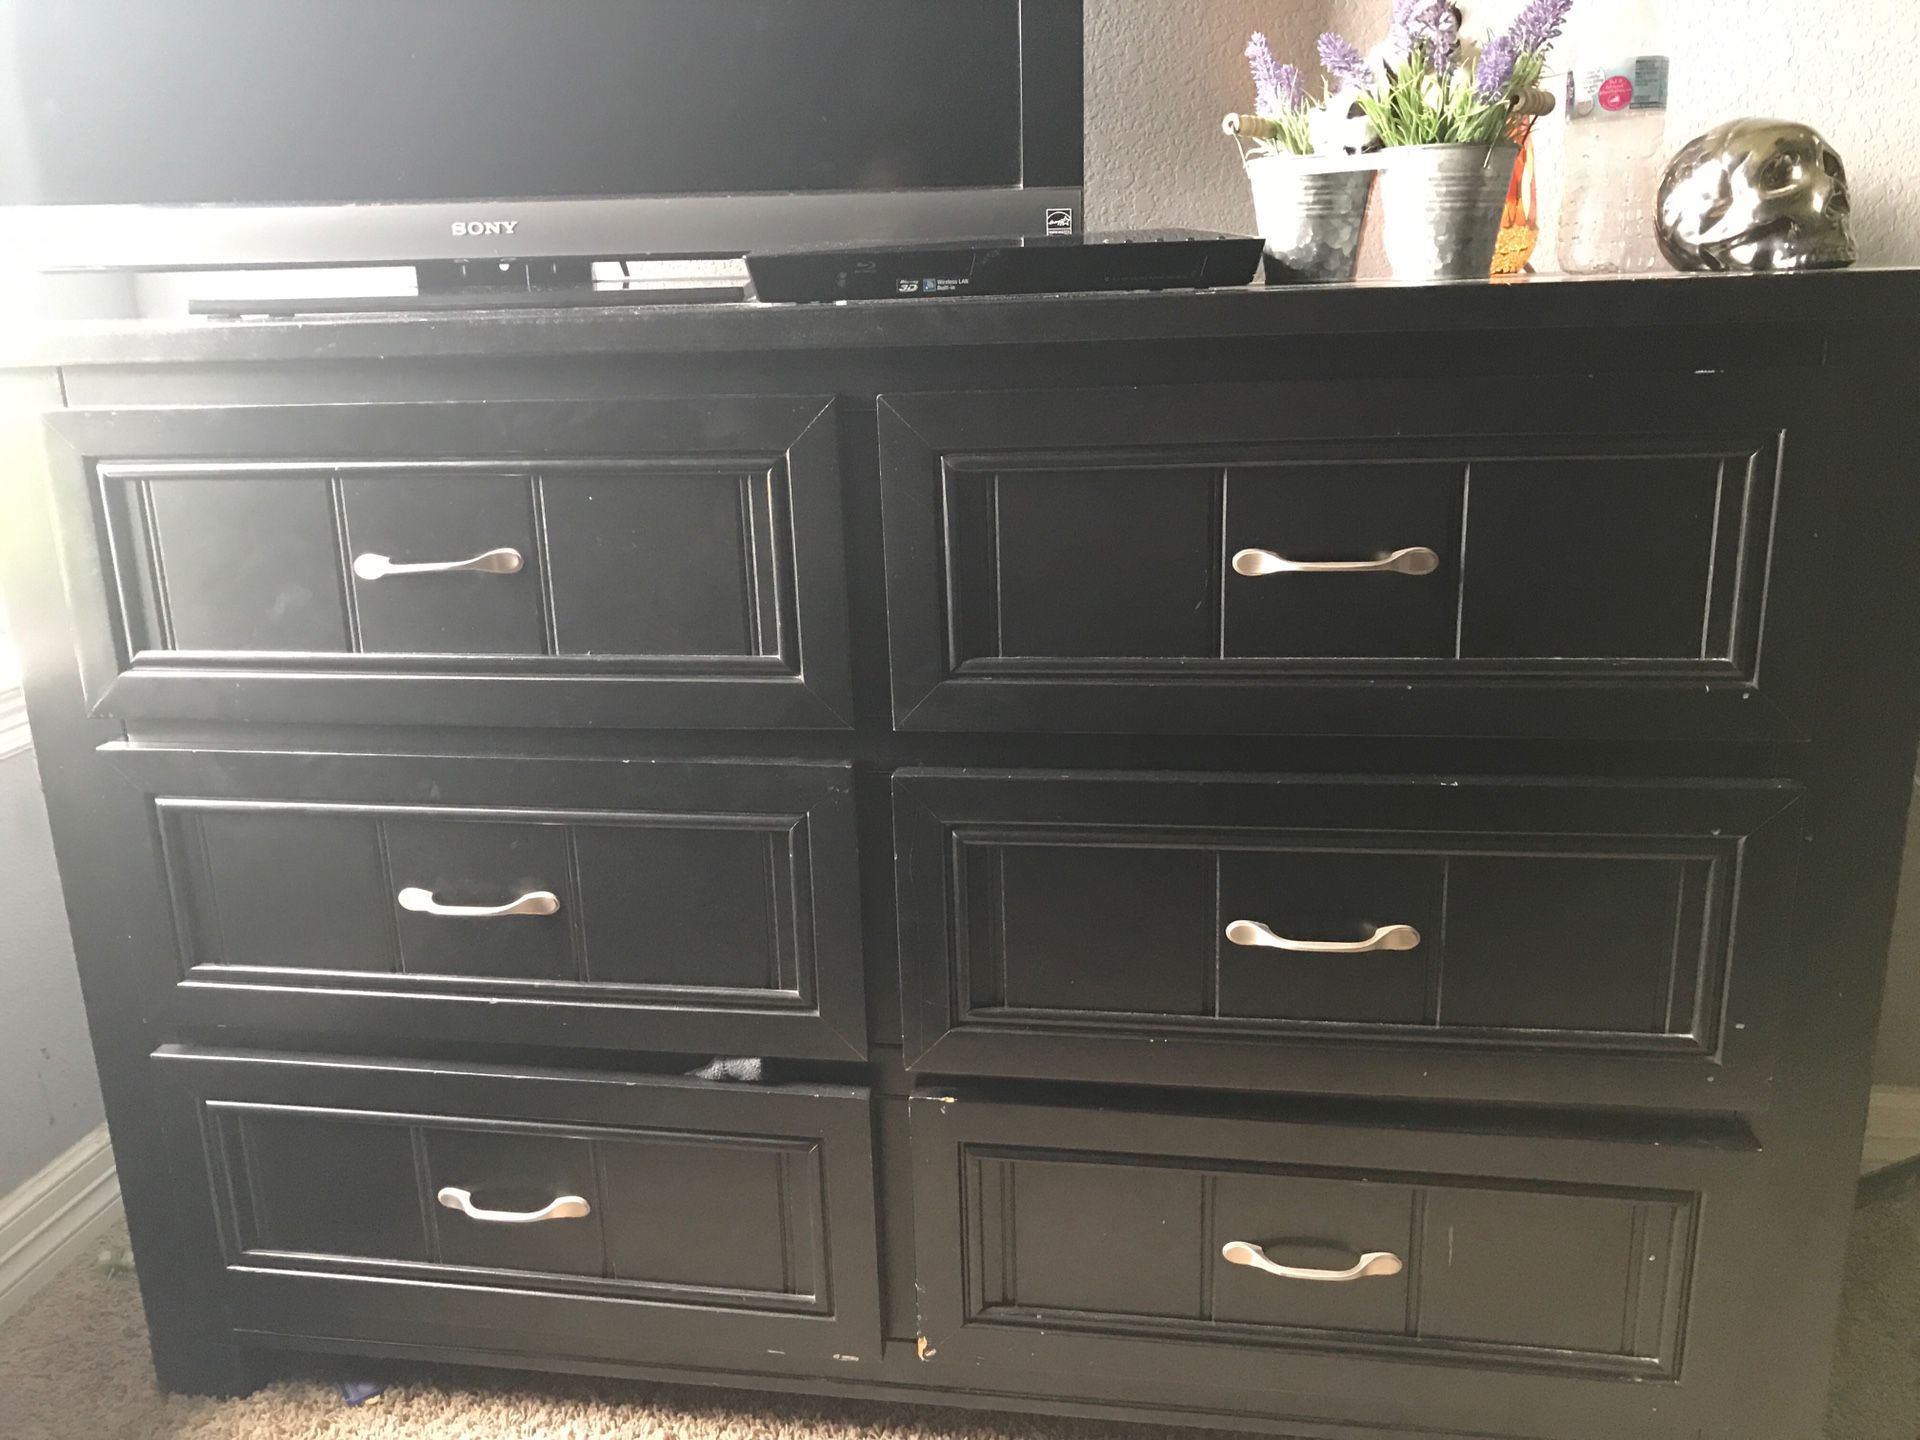 Selling full size bed with dresser (tv not included ) dresser has a little scratches but nothing major. Bed comes with mattress and bottom twin size